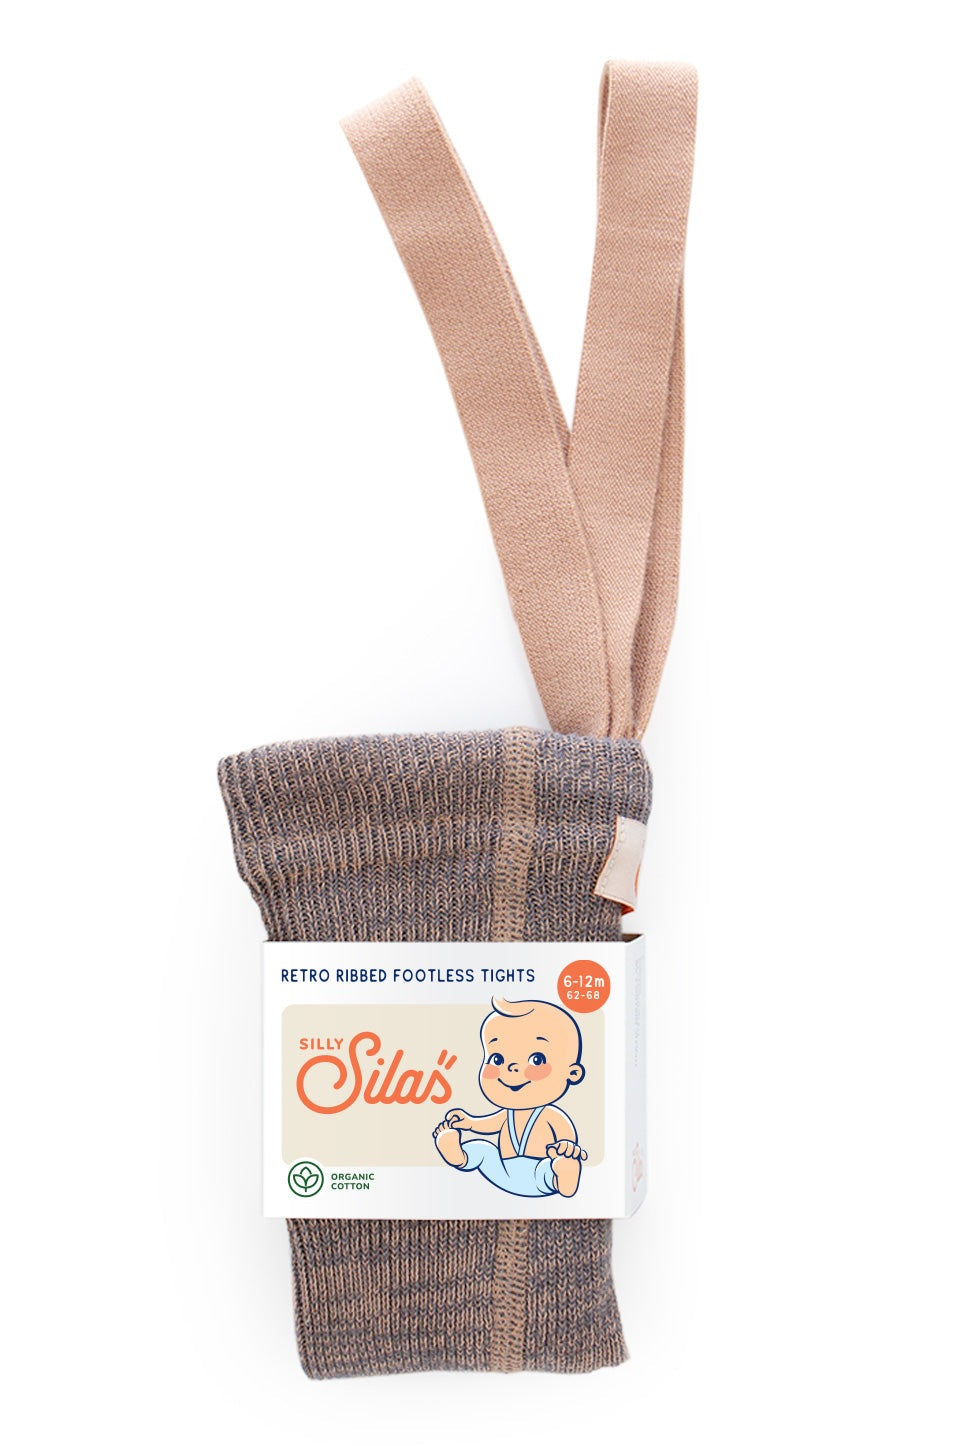 Silly Silas, Footless Tights with Braces, Charcoaly Brown, baby tights, children’s tights, Nottinghamshire stockist, independent kids brand, midlands baby store 